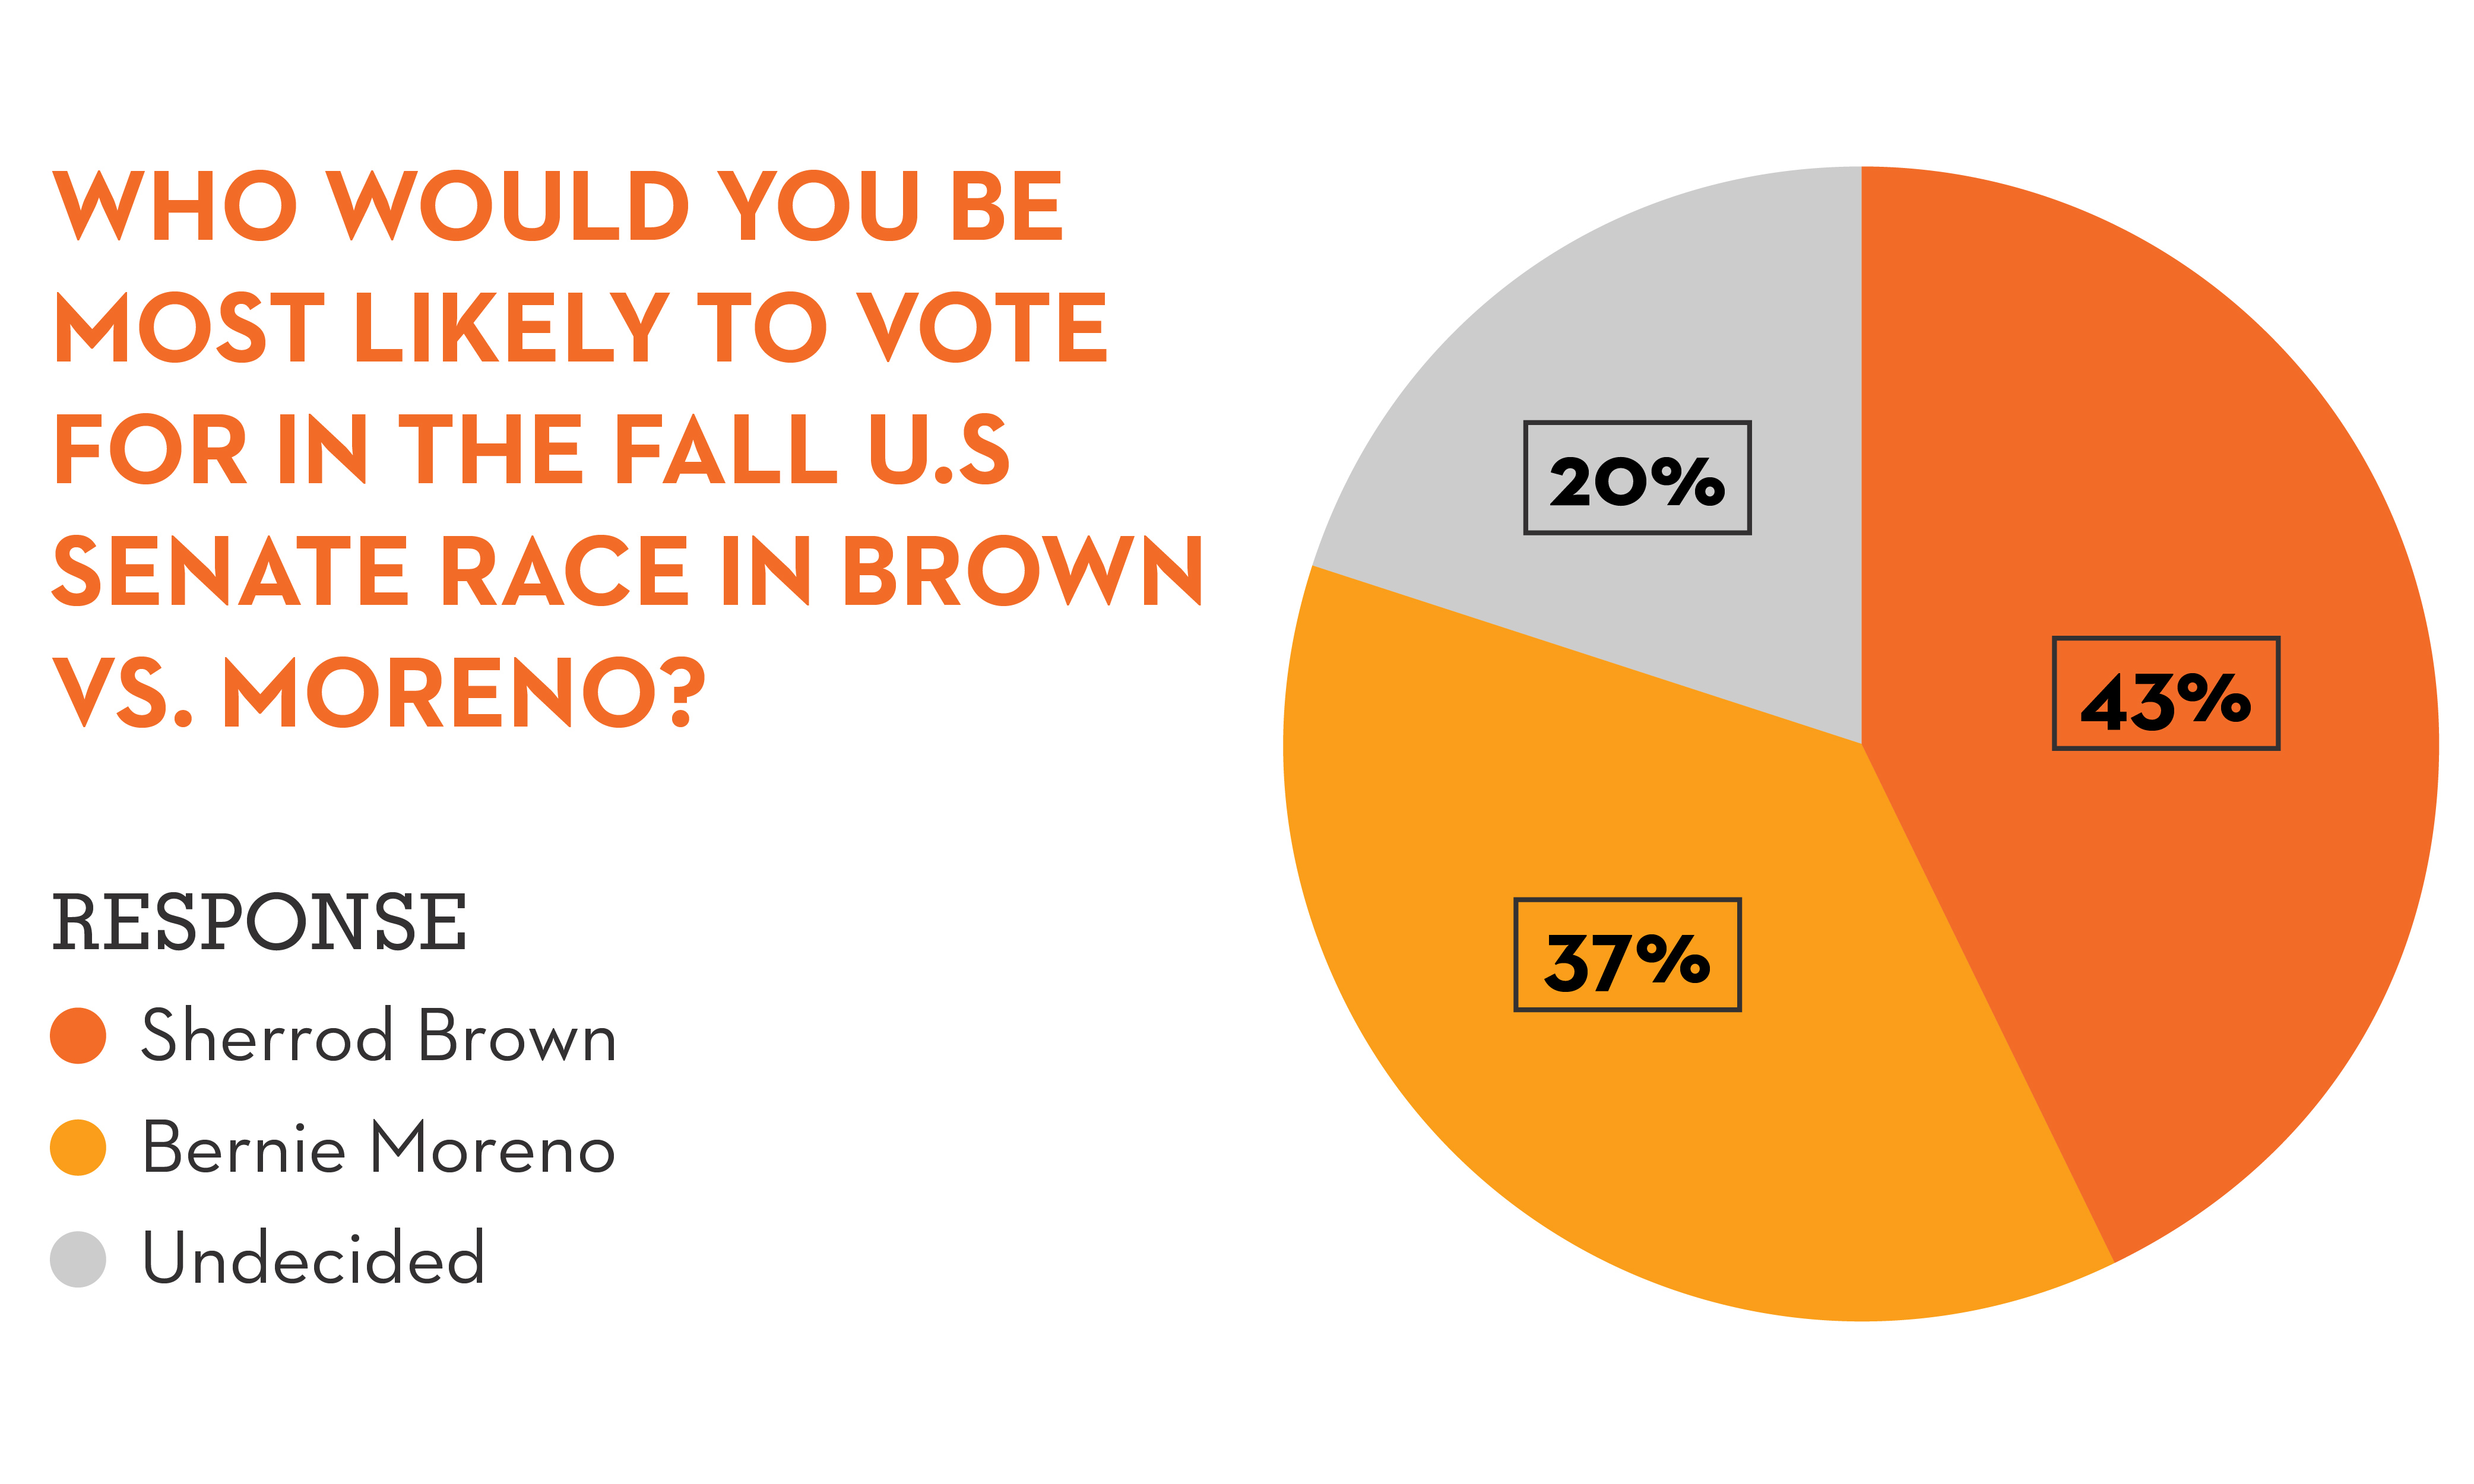 Graphic pie chart answering question "Who would you be most likely to vote for in the fall U.S. Senate Race in Brown vs. Moreno?"